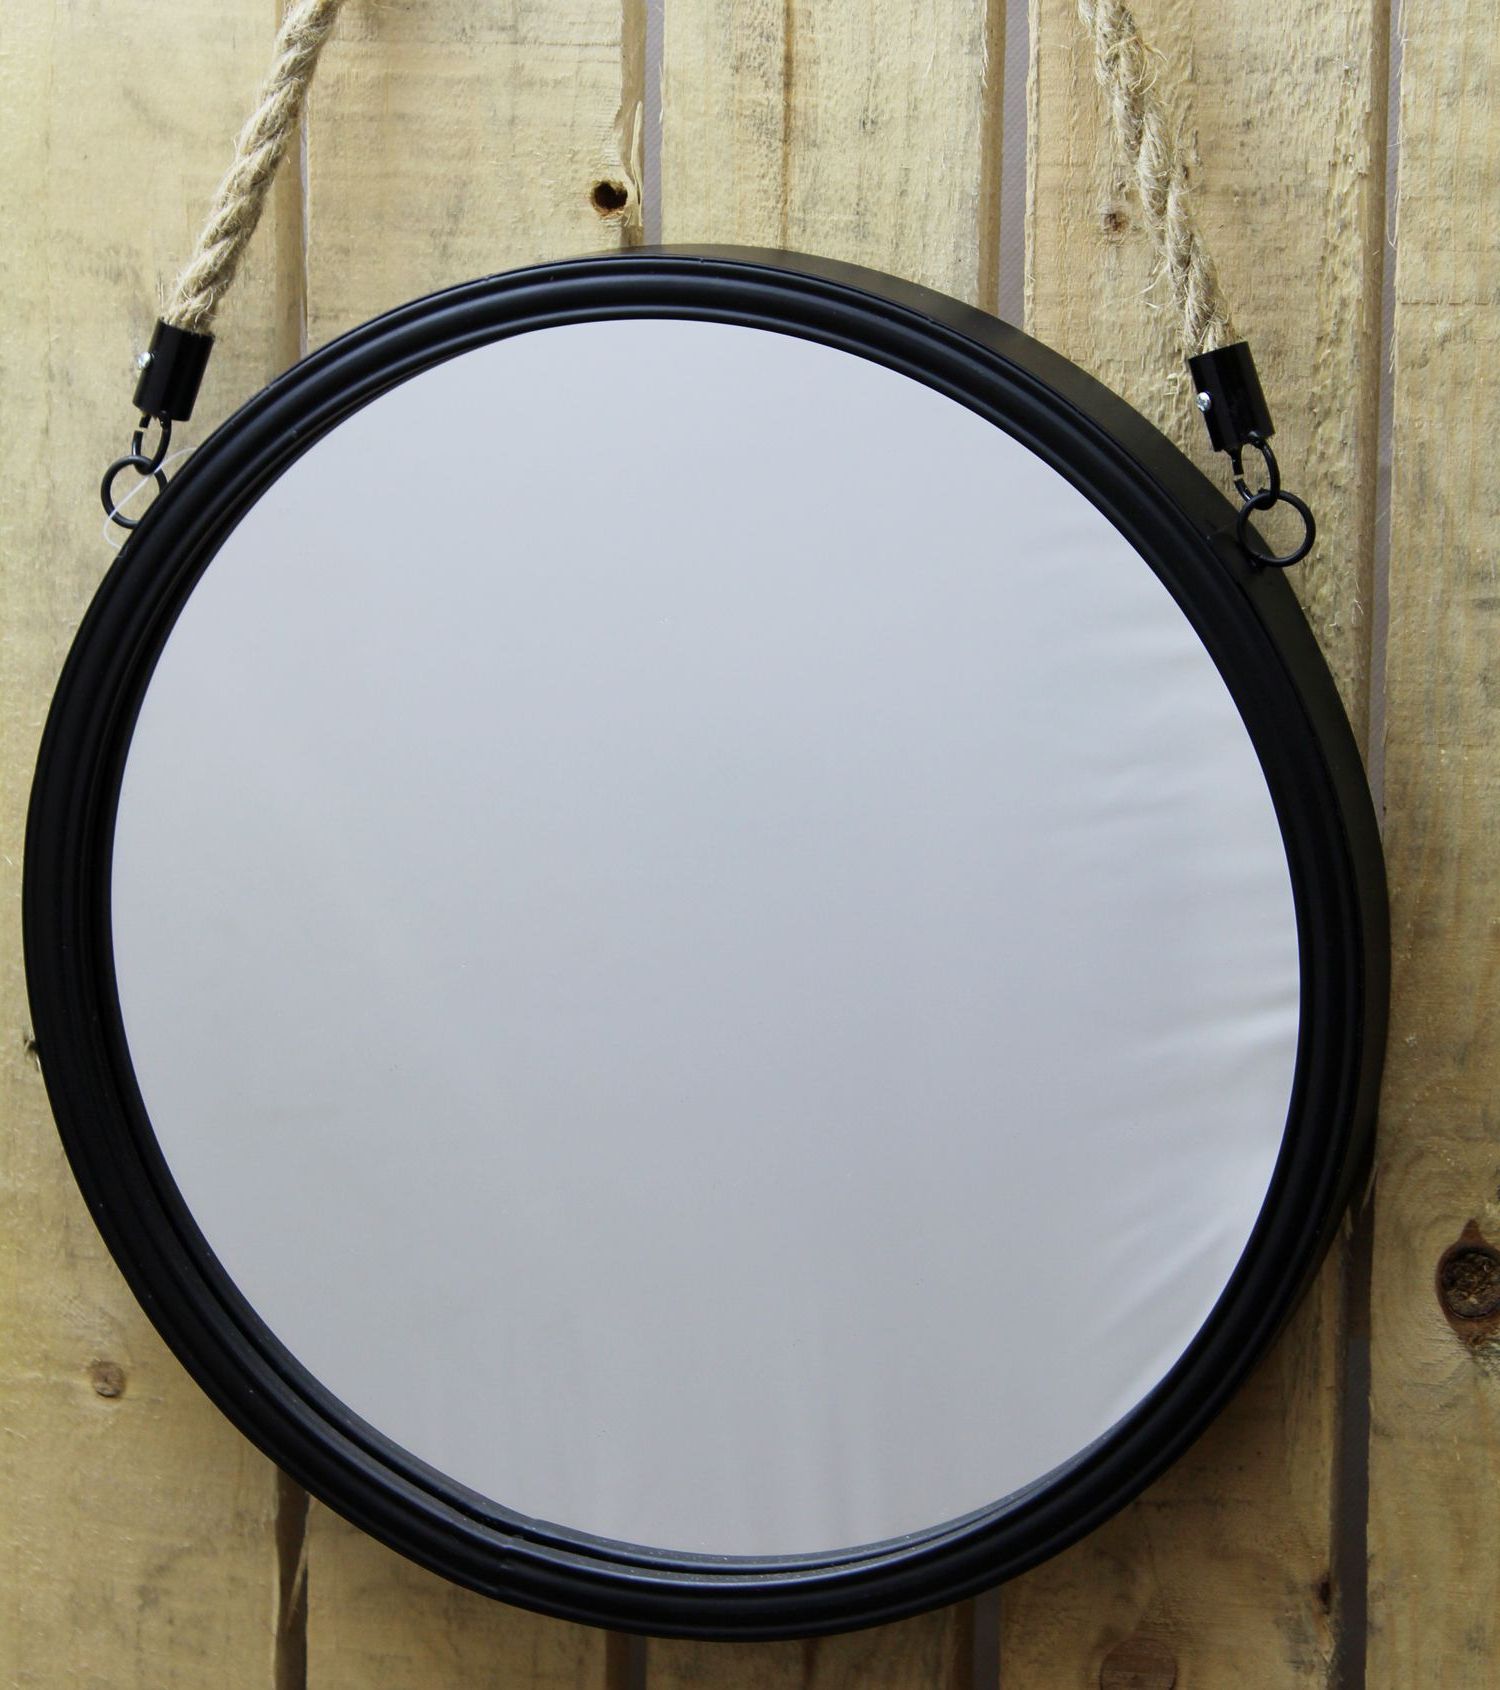 Ebay Intended For Best And Newest Black Openwork Round Metal Wall Mirrors (View 9 of 15)